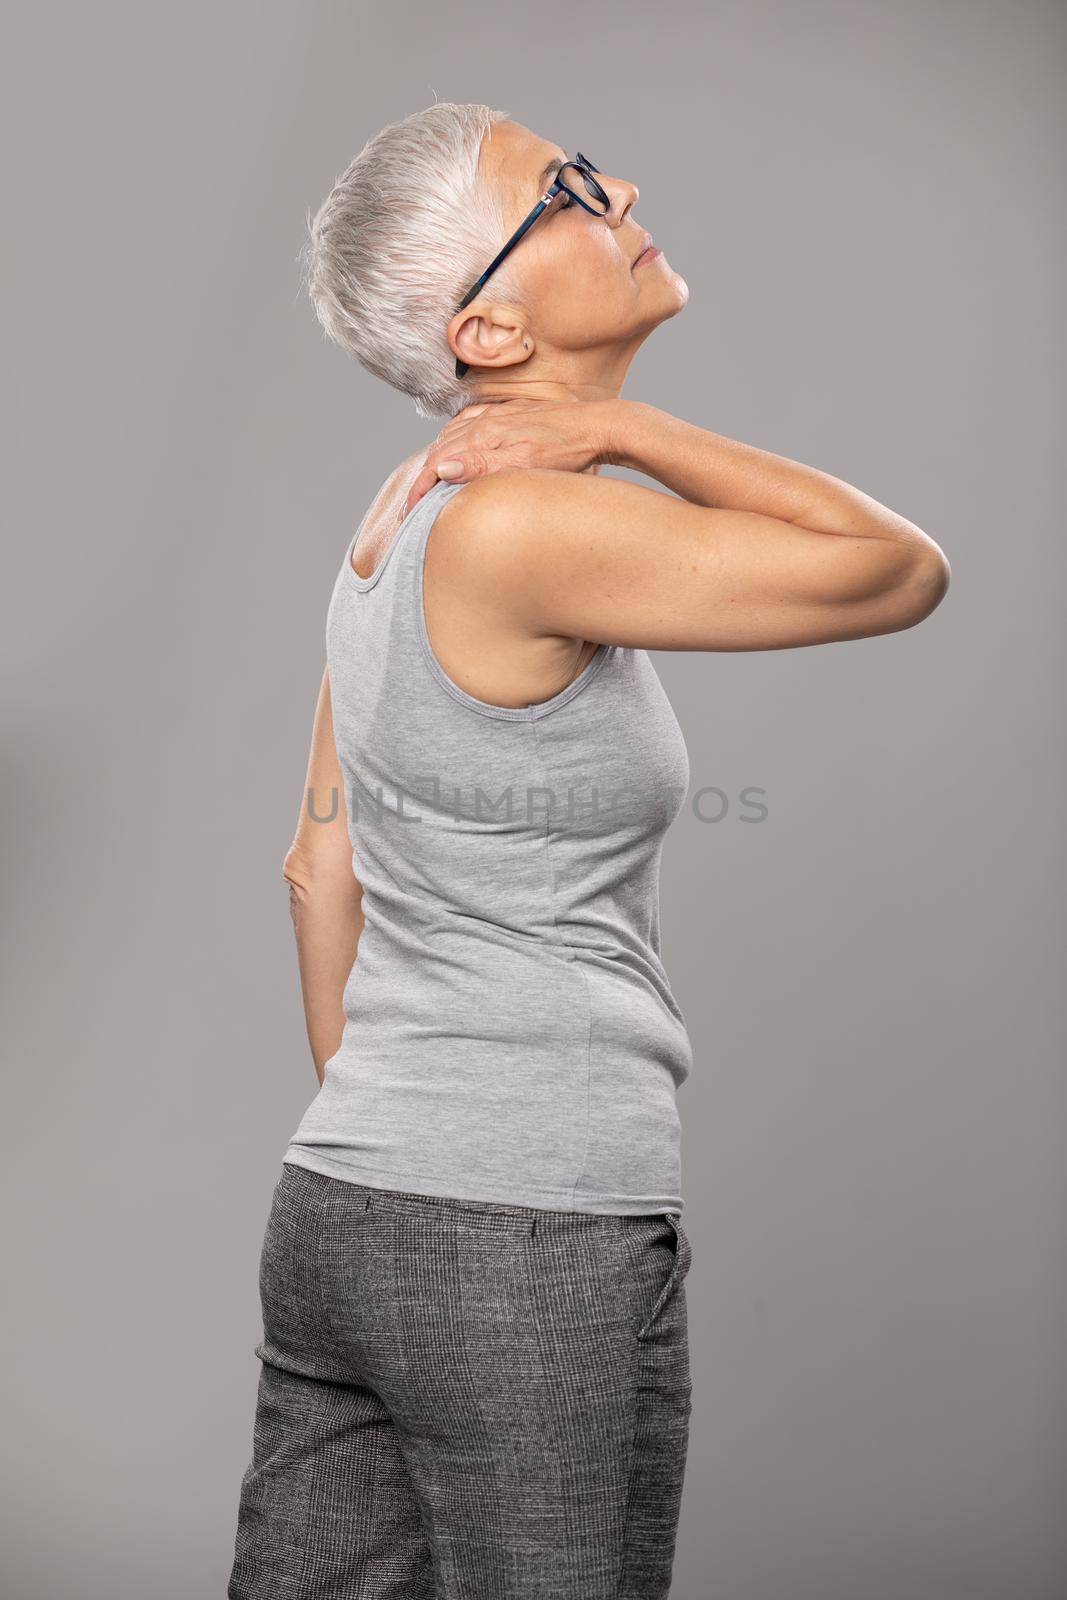 Backache pain in back, senior old woman with short gray hair and body and spinal muscle problems